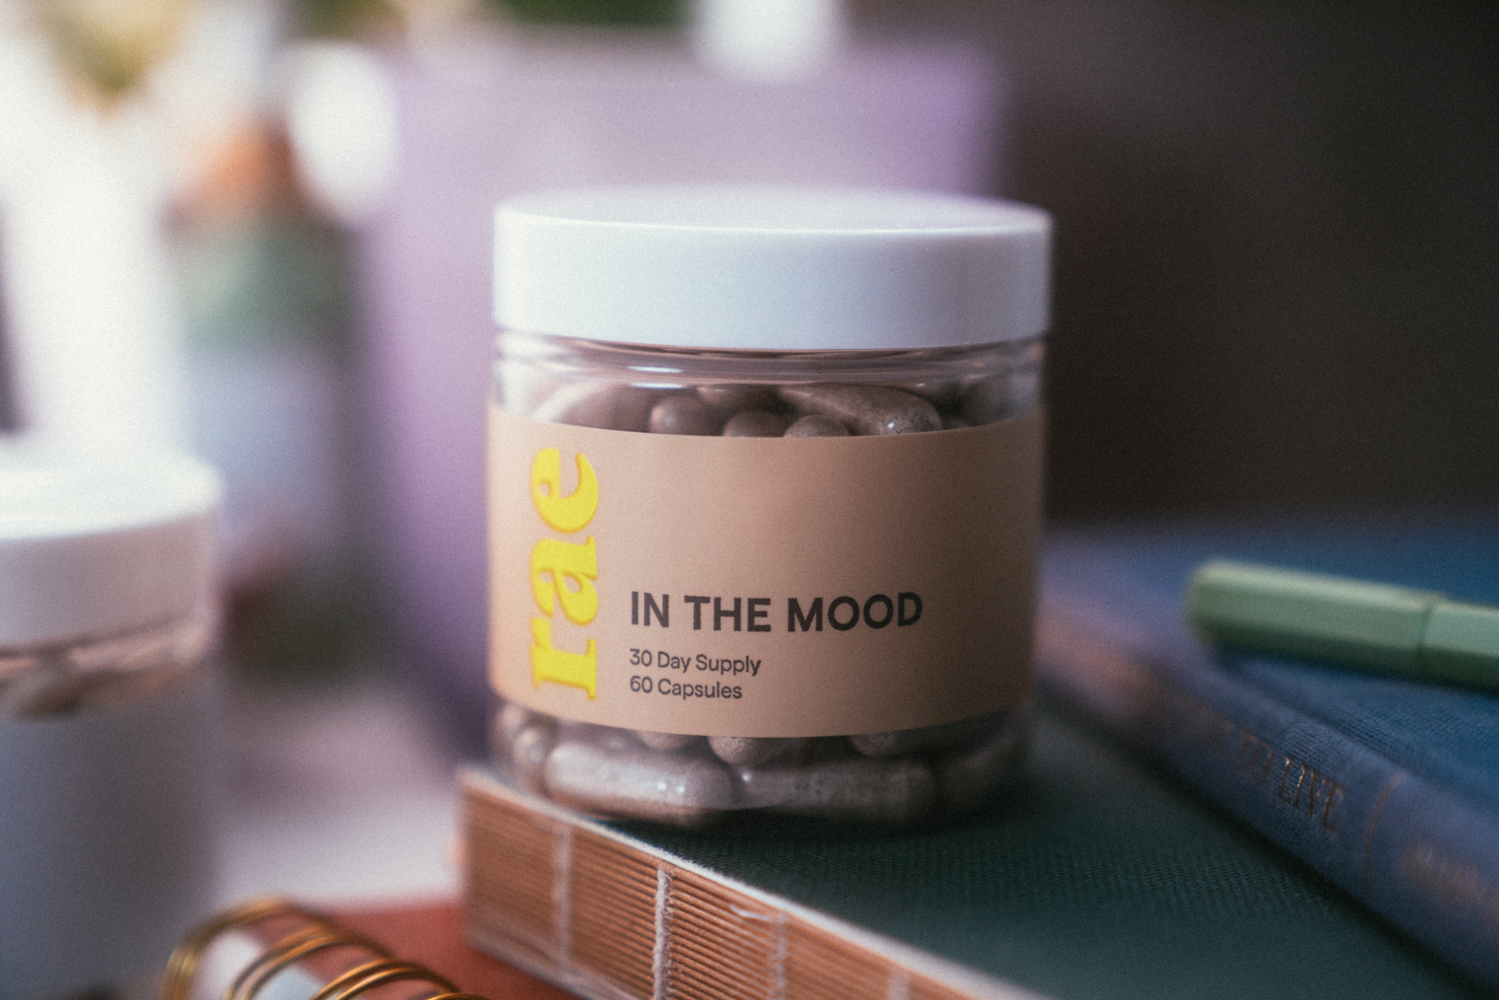 A jar of In The Mood supplement pills sits on a stack of books.